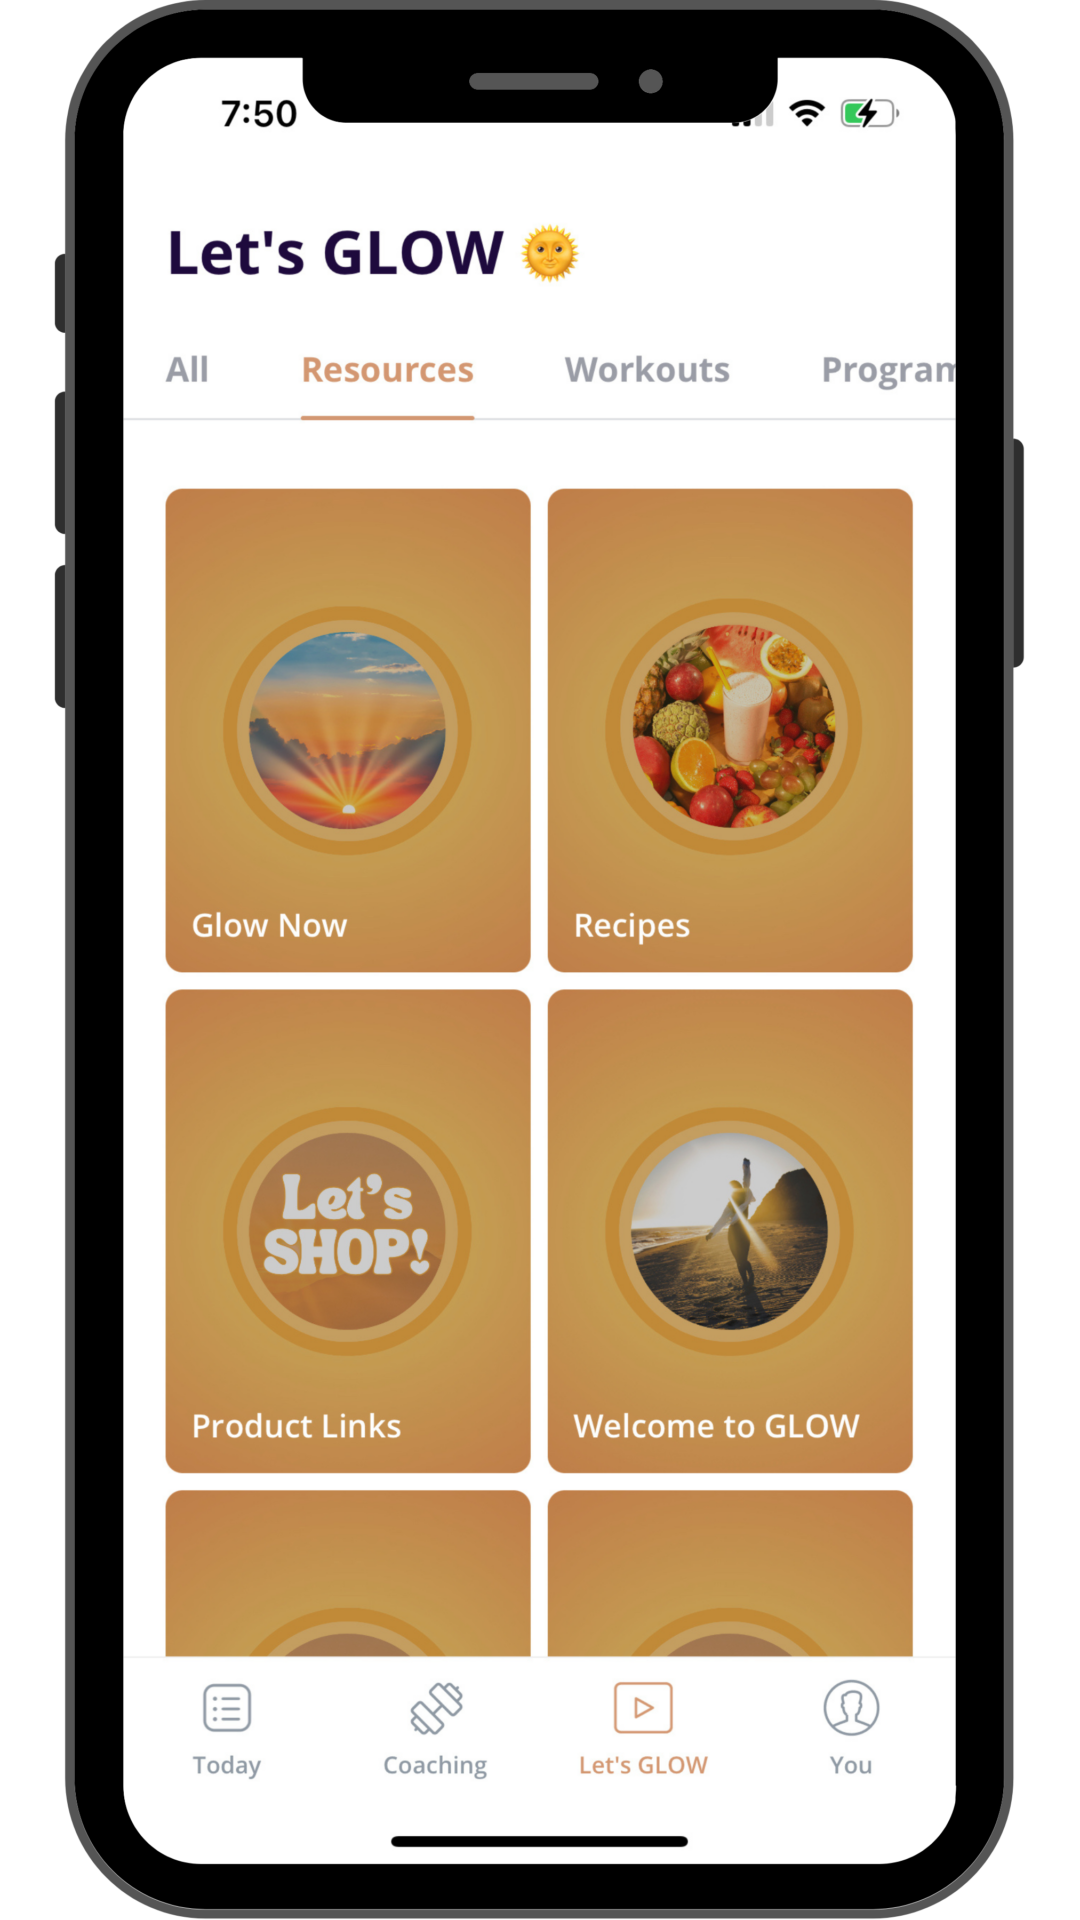 GLOW Phone Demo: RESOURCES: Everything you need in one app